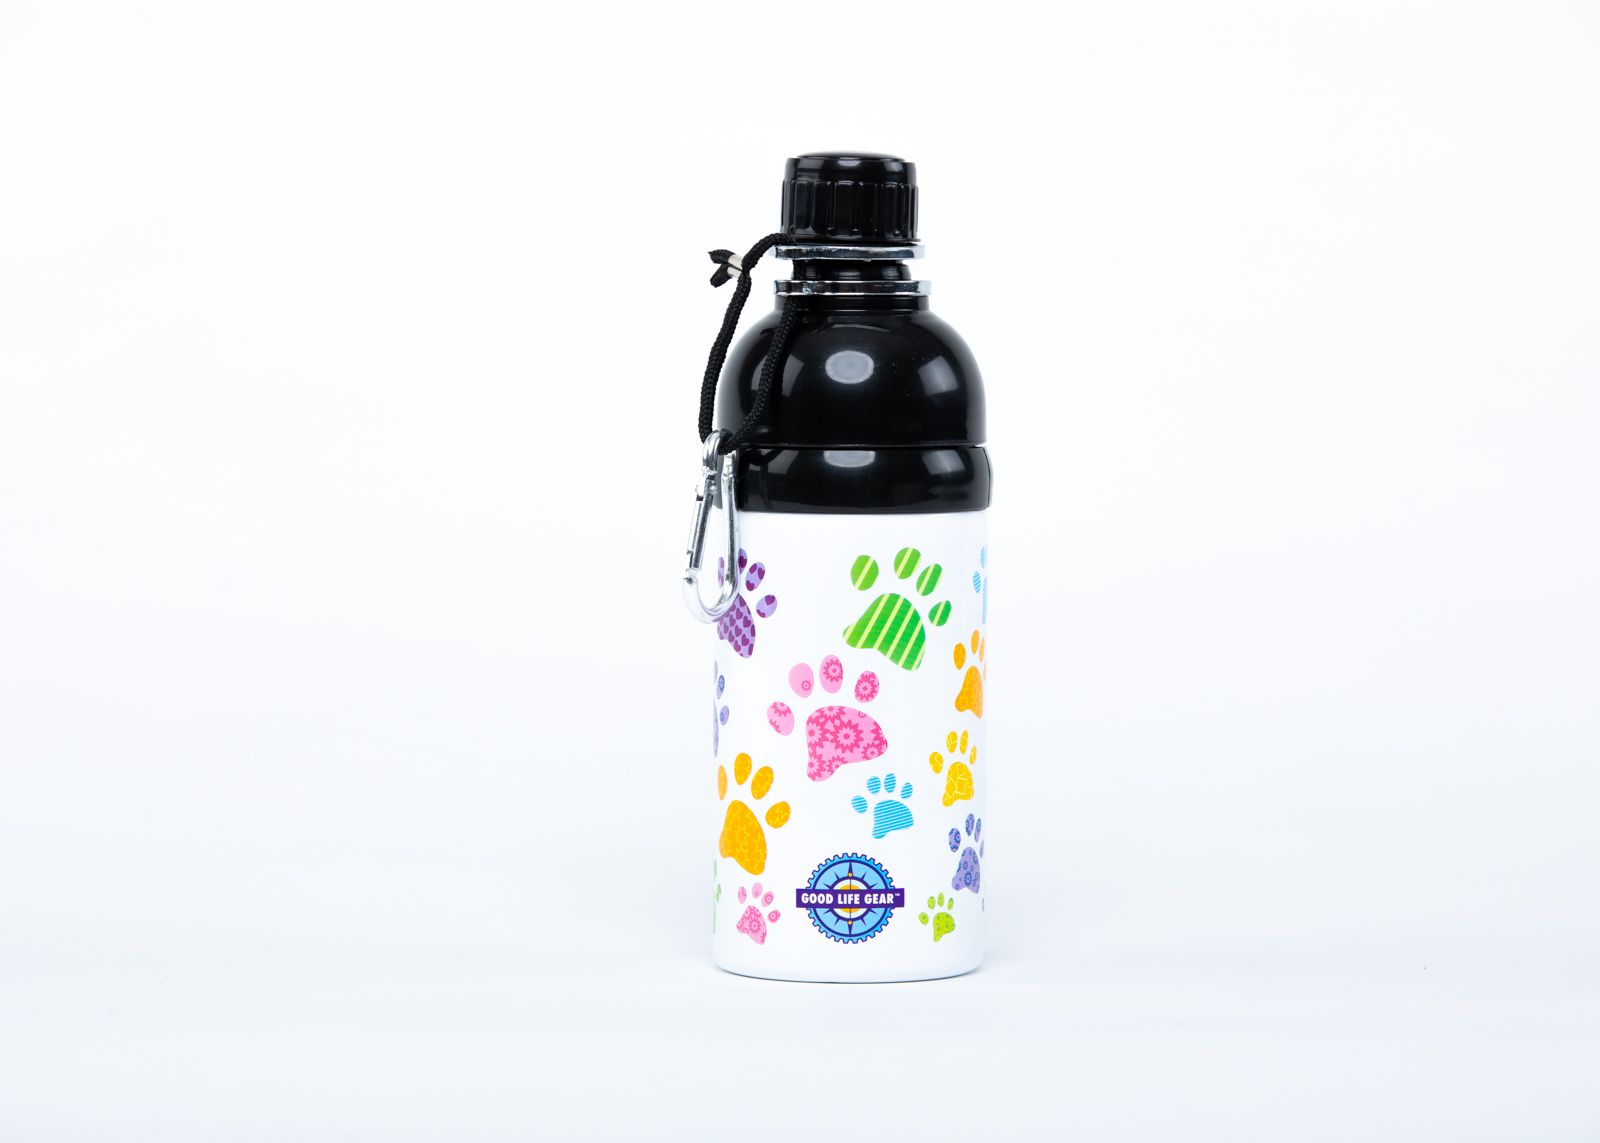 16 Oz. Stainless Steel Pet Water Bottle With Carabineer - Puppy Paws